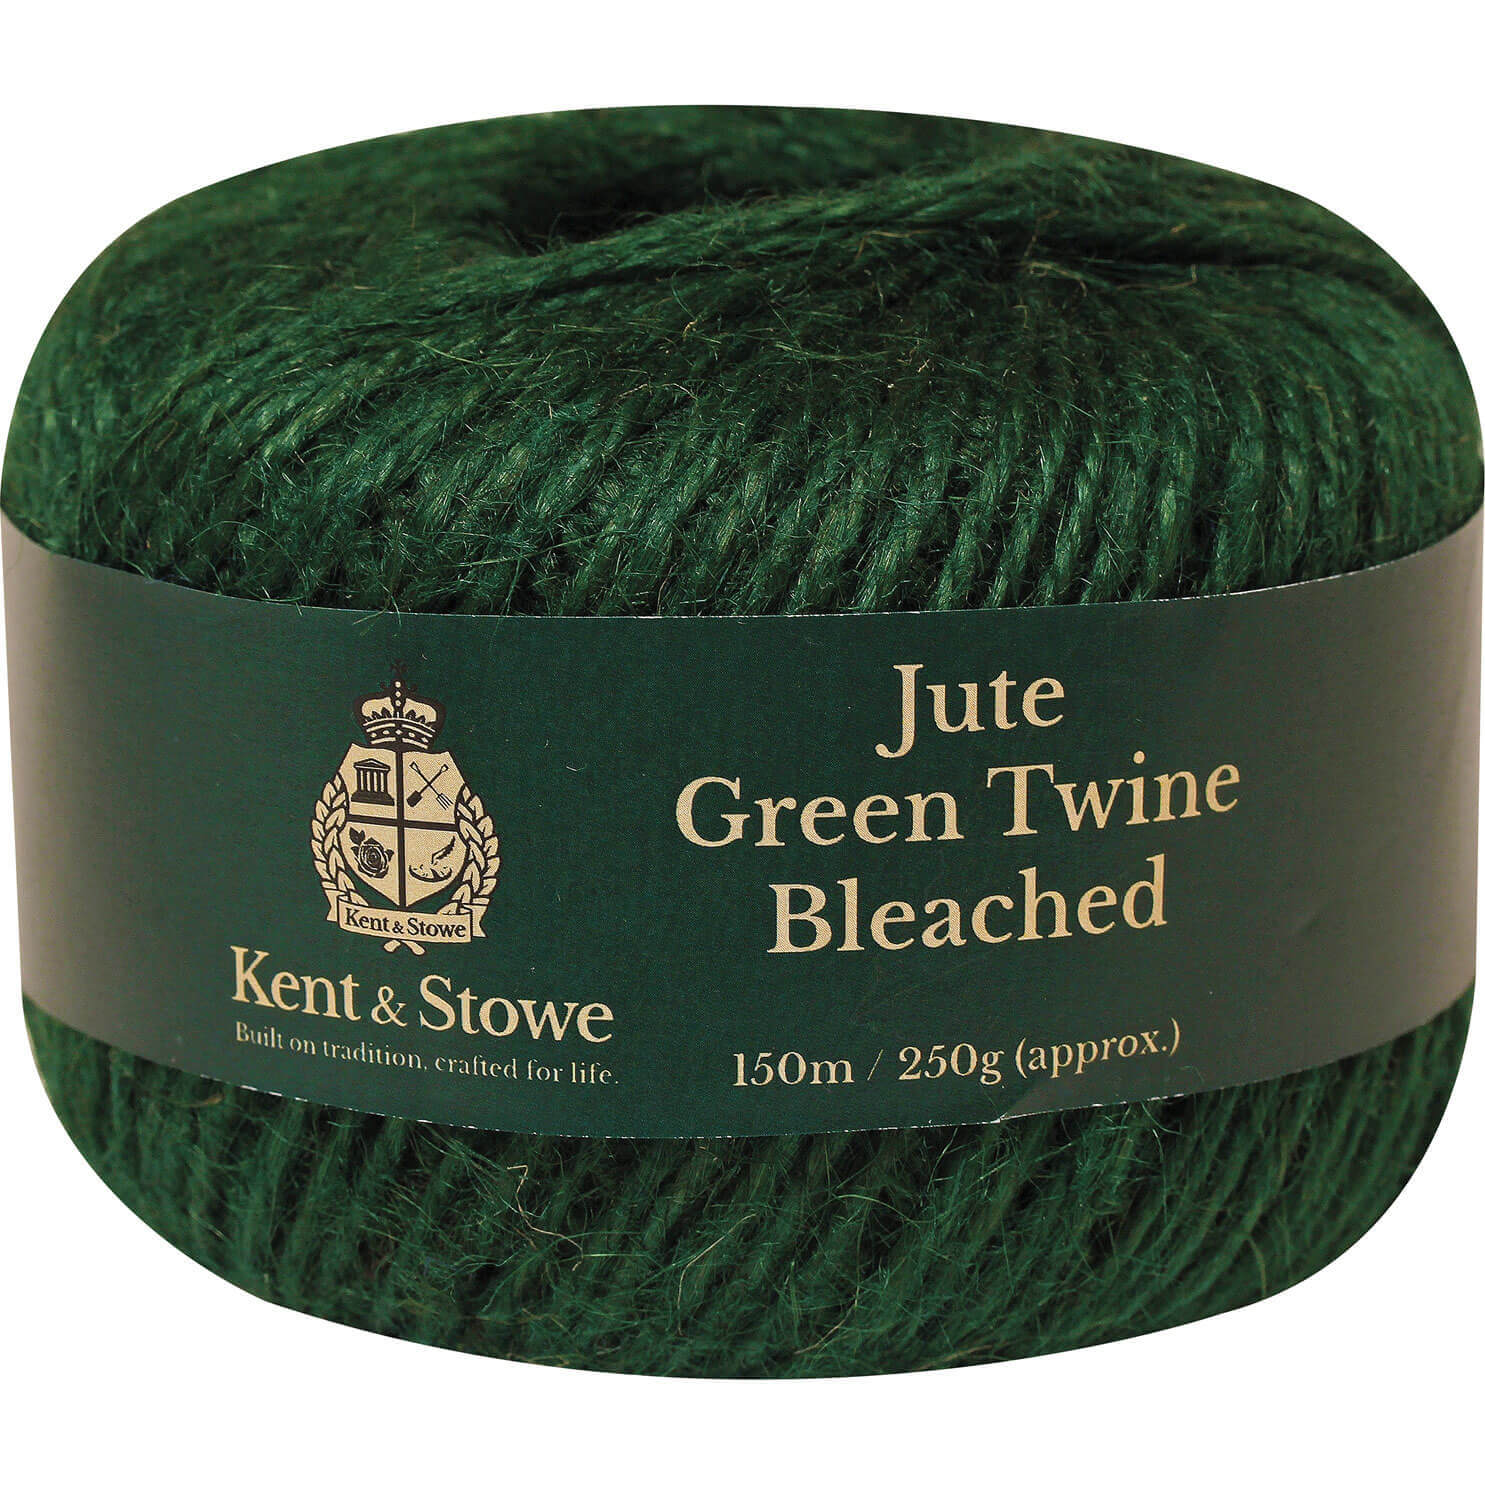 Photo of Kent And Stowe Jute Garden Twine Bleached Green 150m